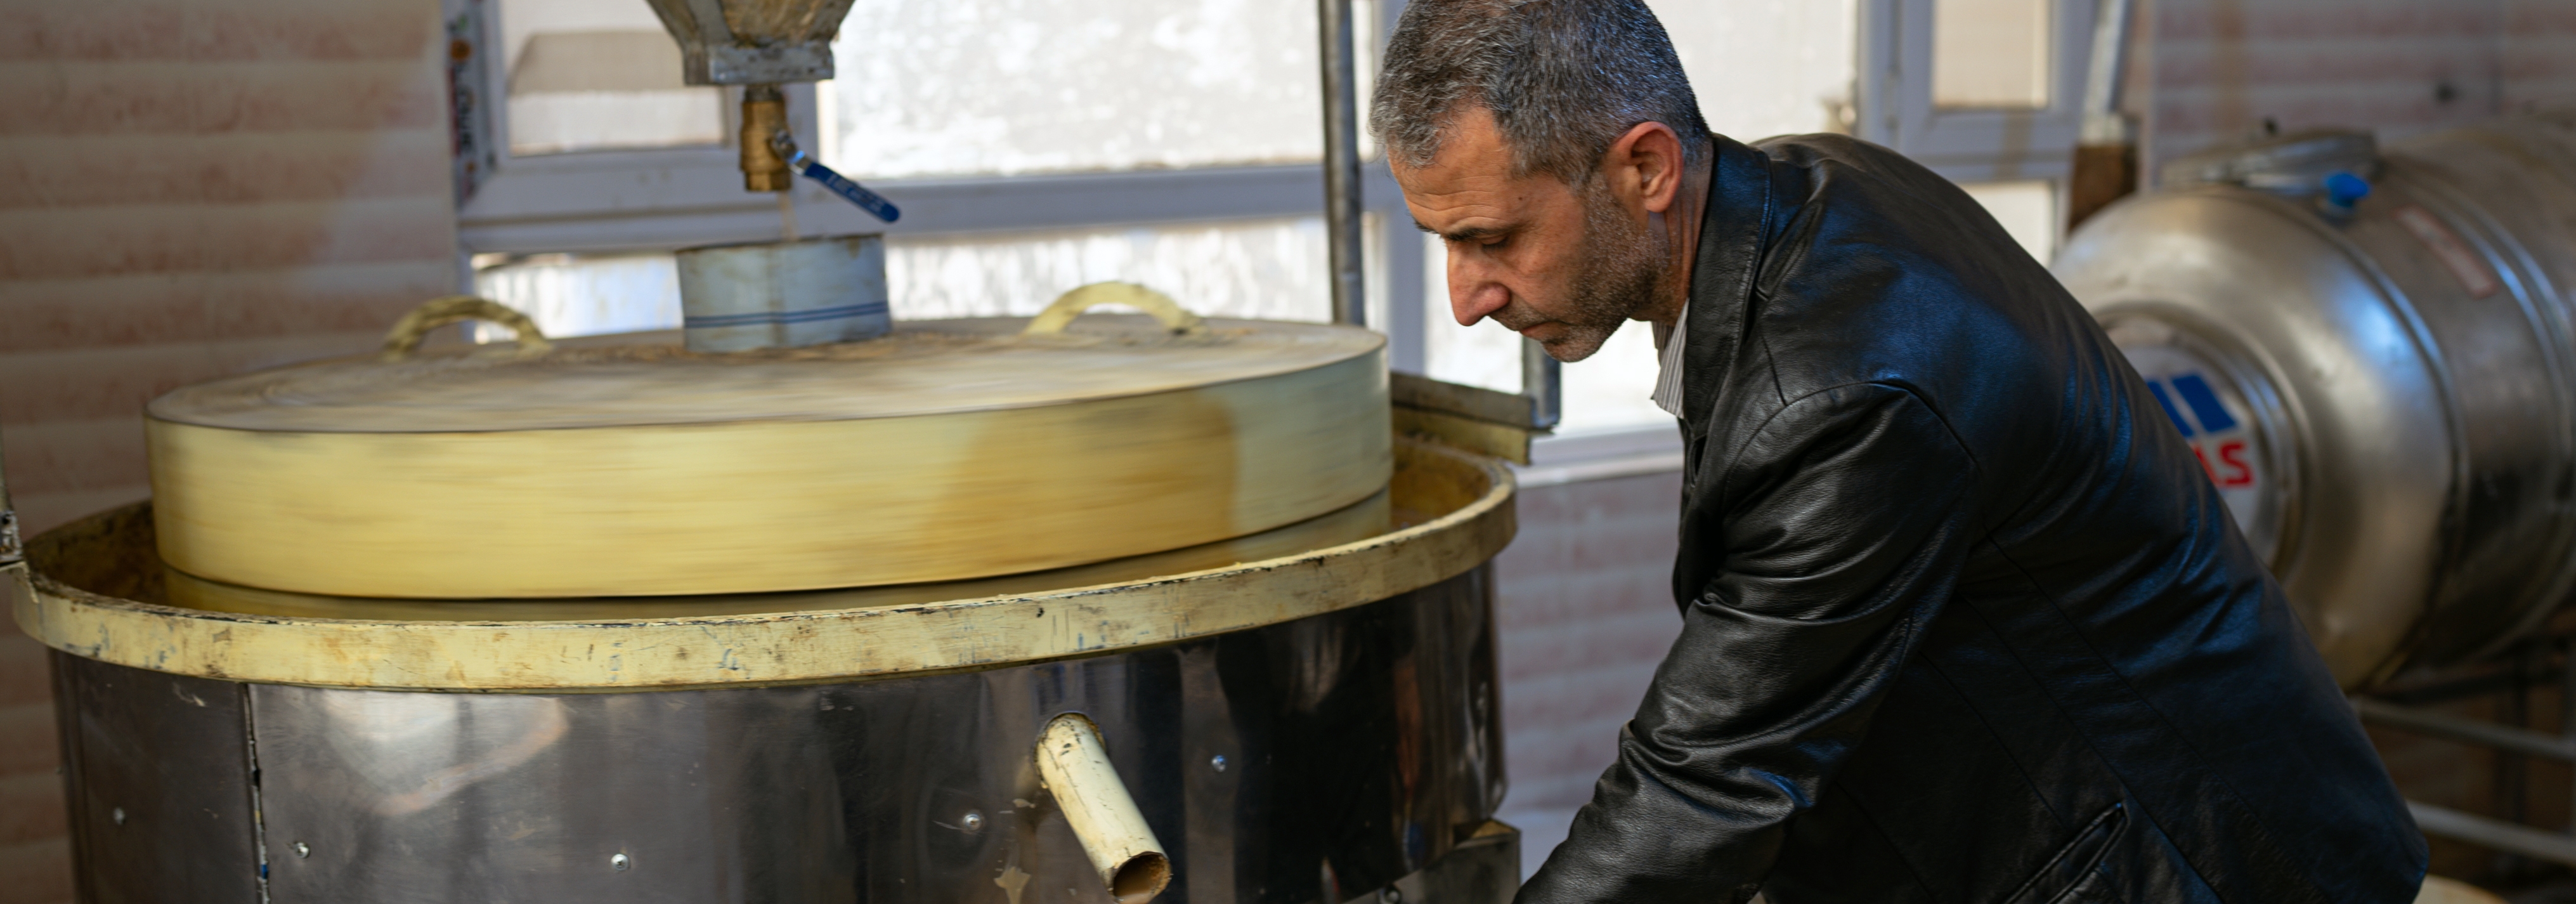 A Syrian man in Erbil, Iraq making traditional desserts through support from an IOM refugee livelihood program. © IOM 2022 